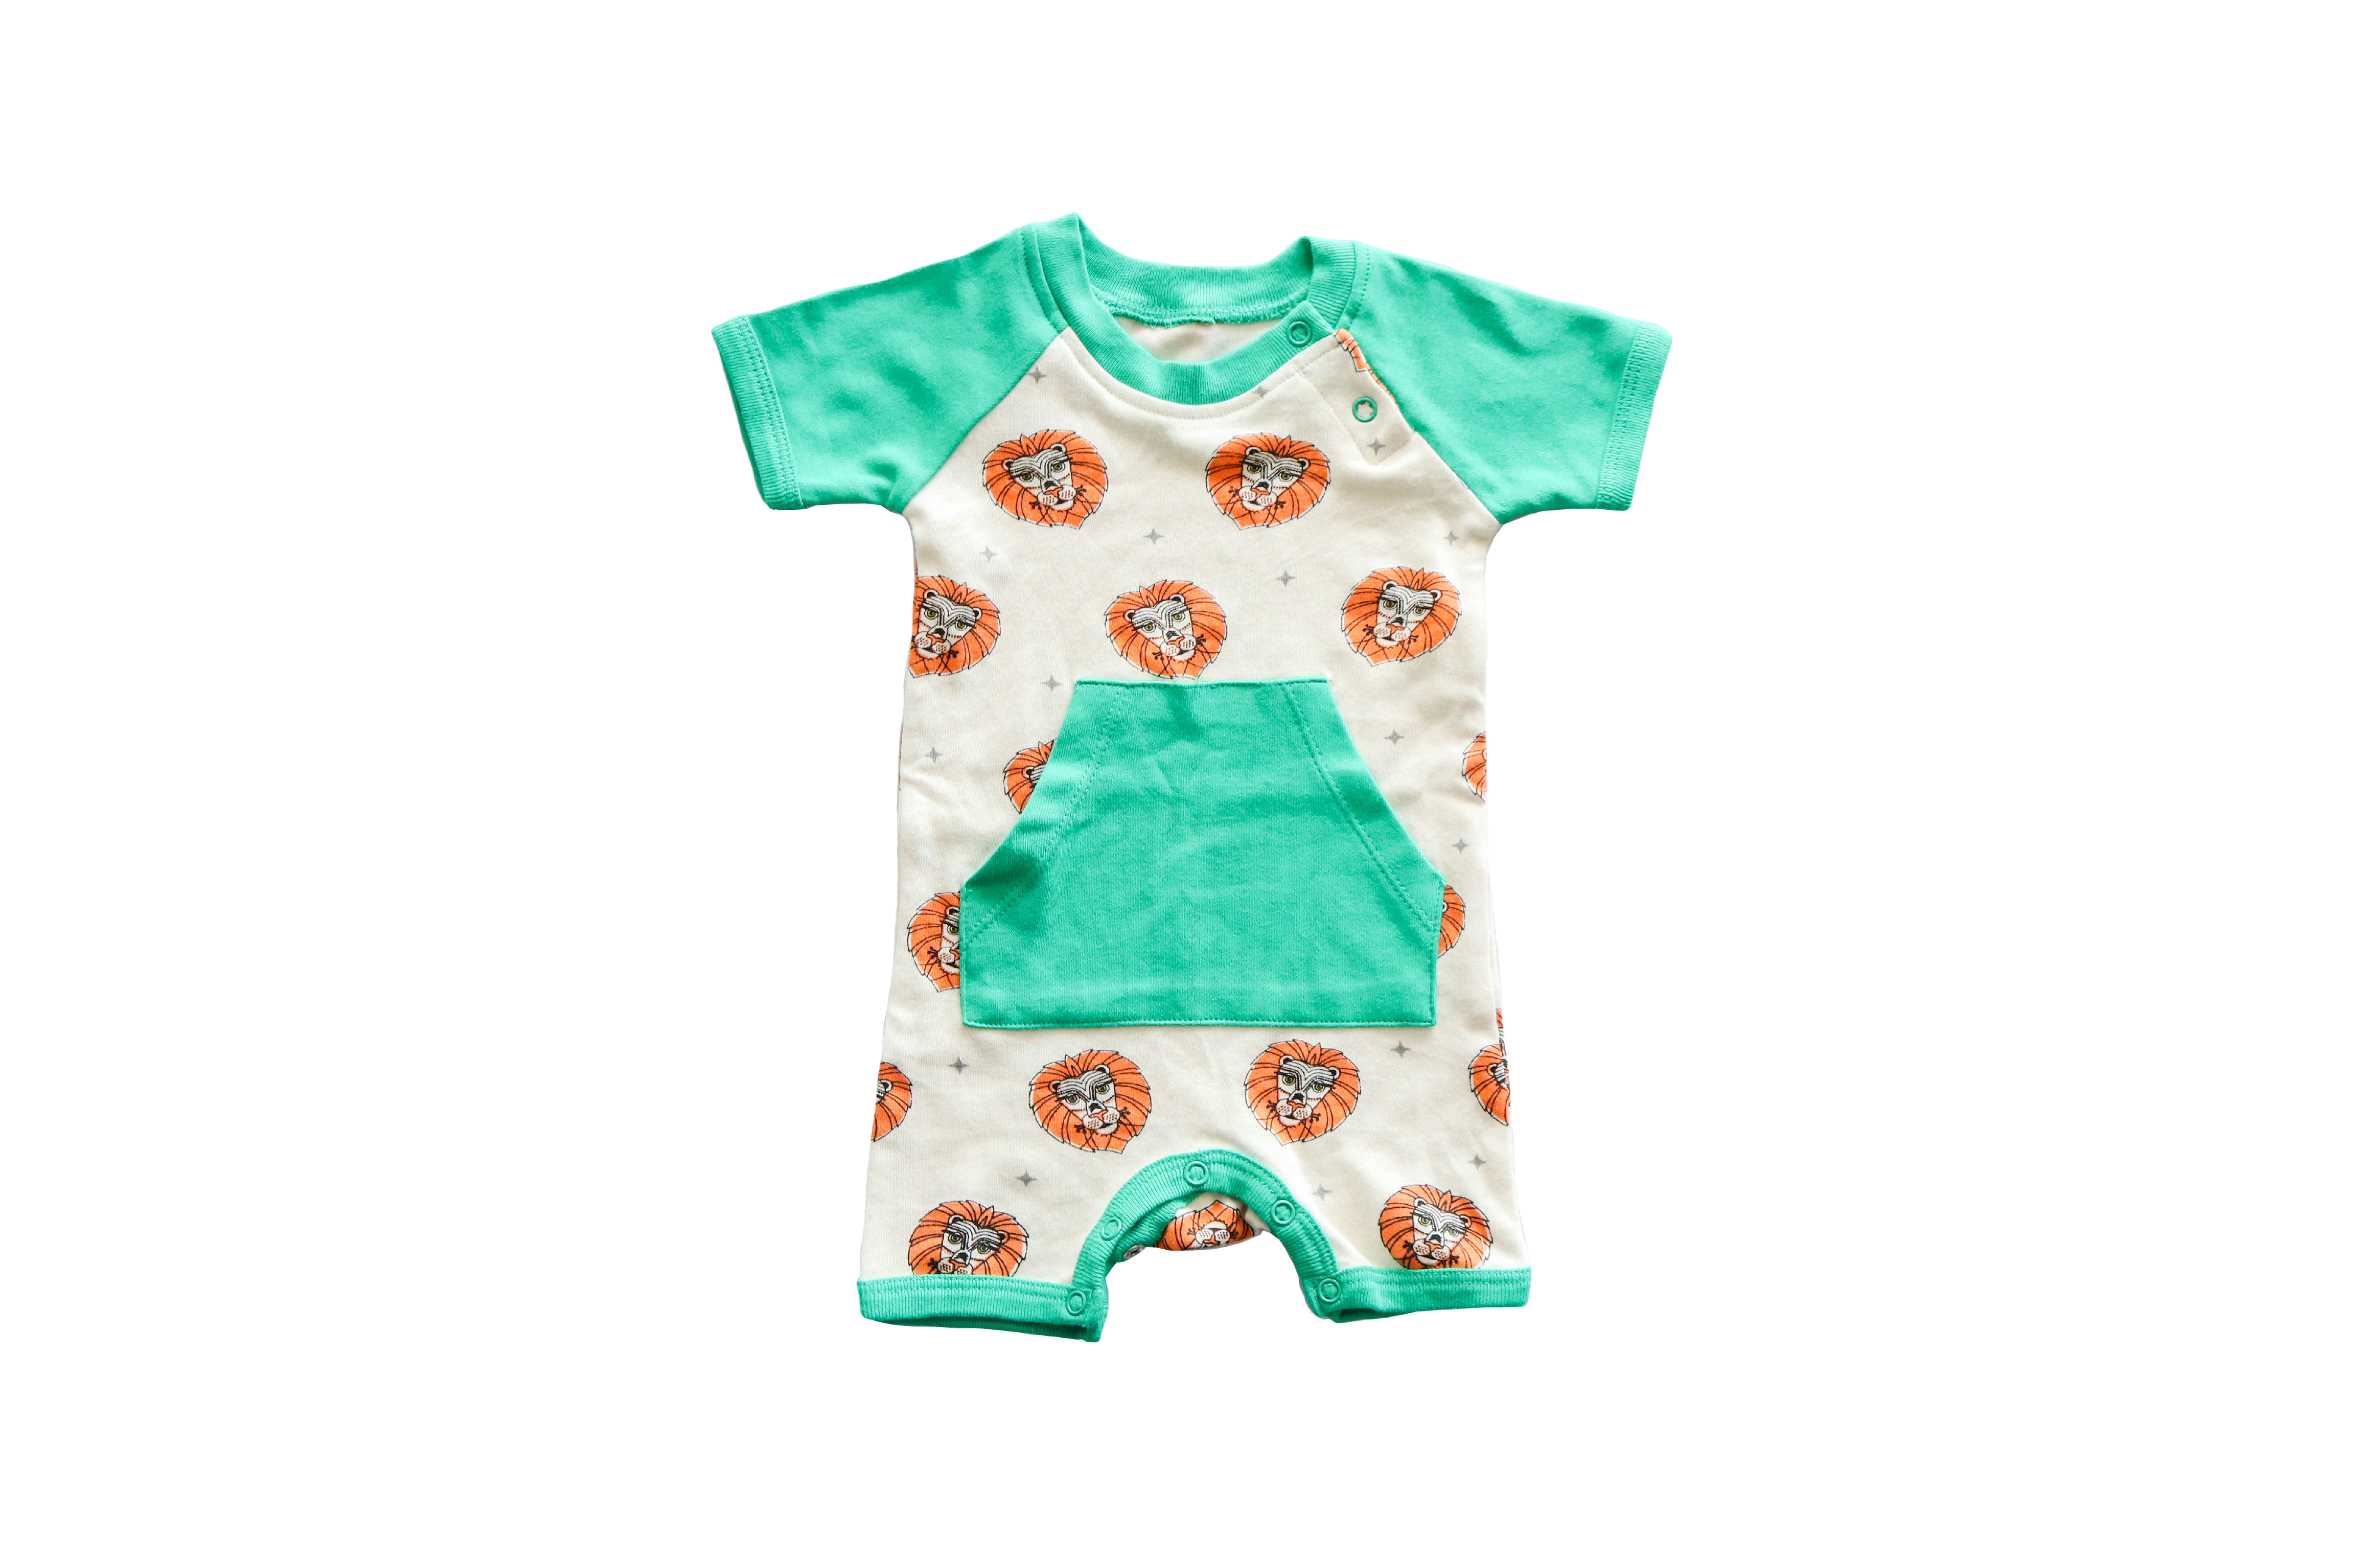 The Best Organic Onesies for Your Little Human - Wild Baby